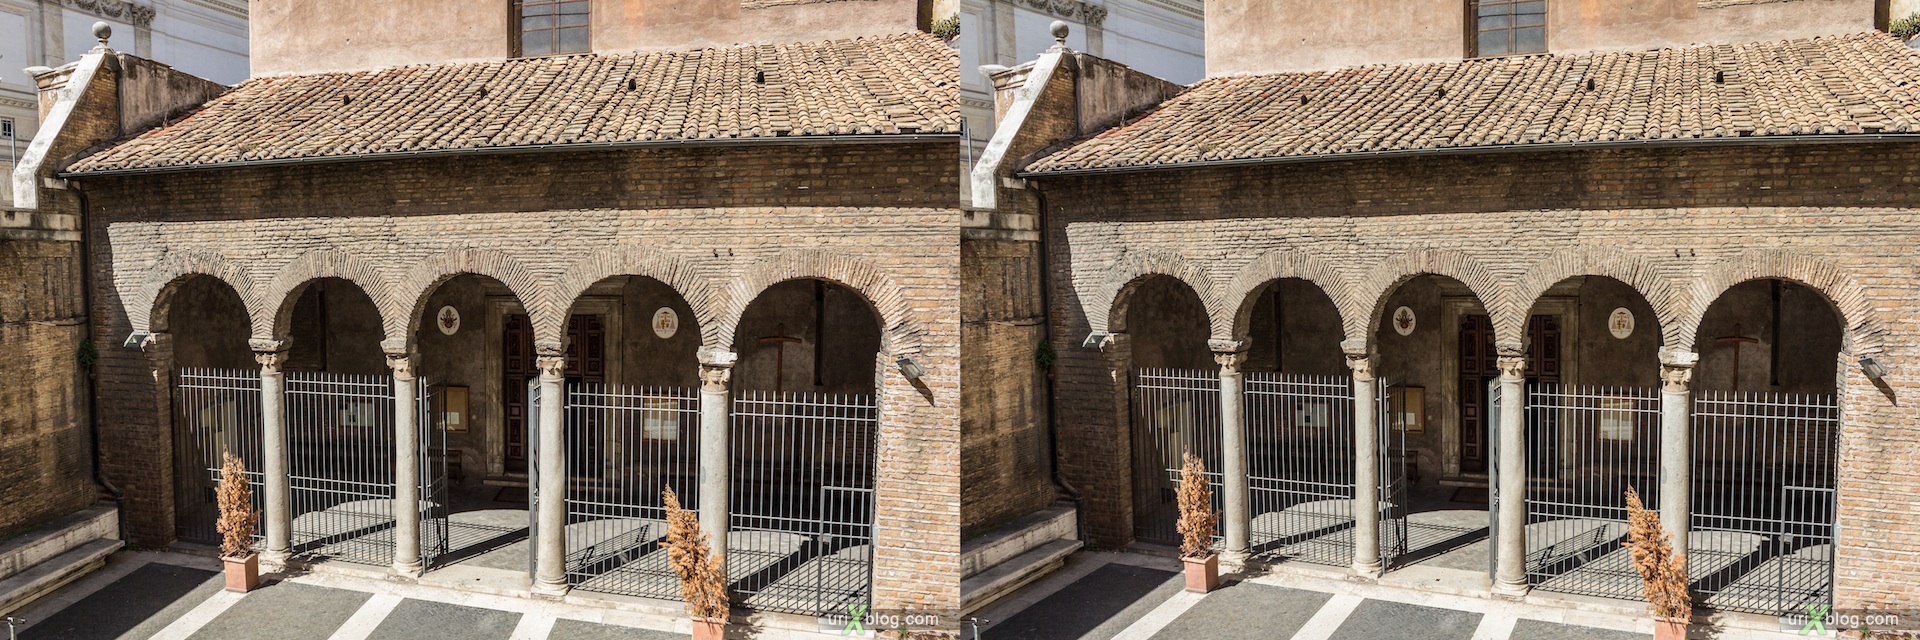 2012, church of San Vitale, Rome, Italy, cathedral, monastery, Christianity, Catholicism, 3D, stereo pair, cross-eyed, crossview, cross view stereo pair